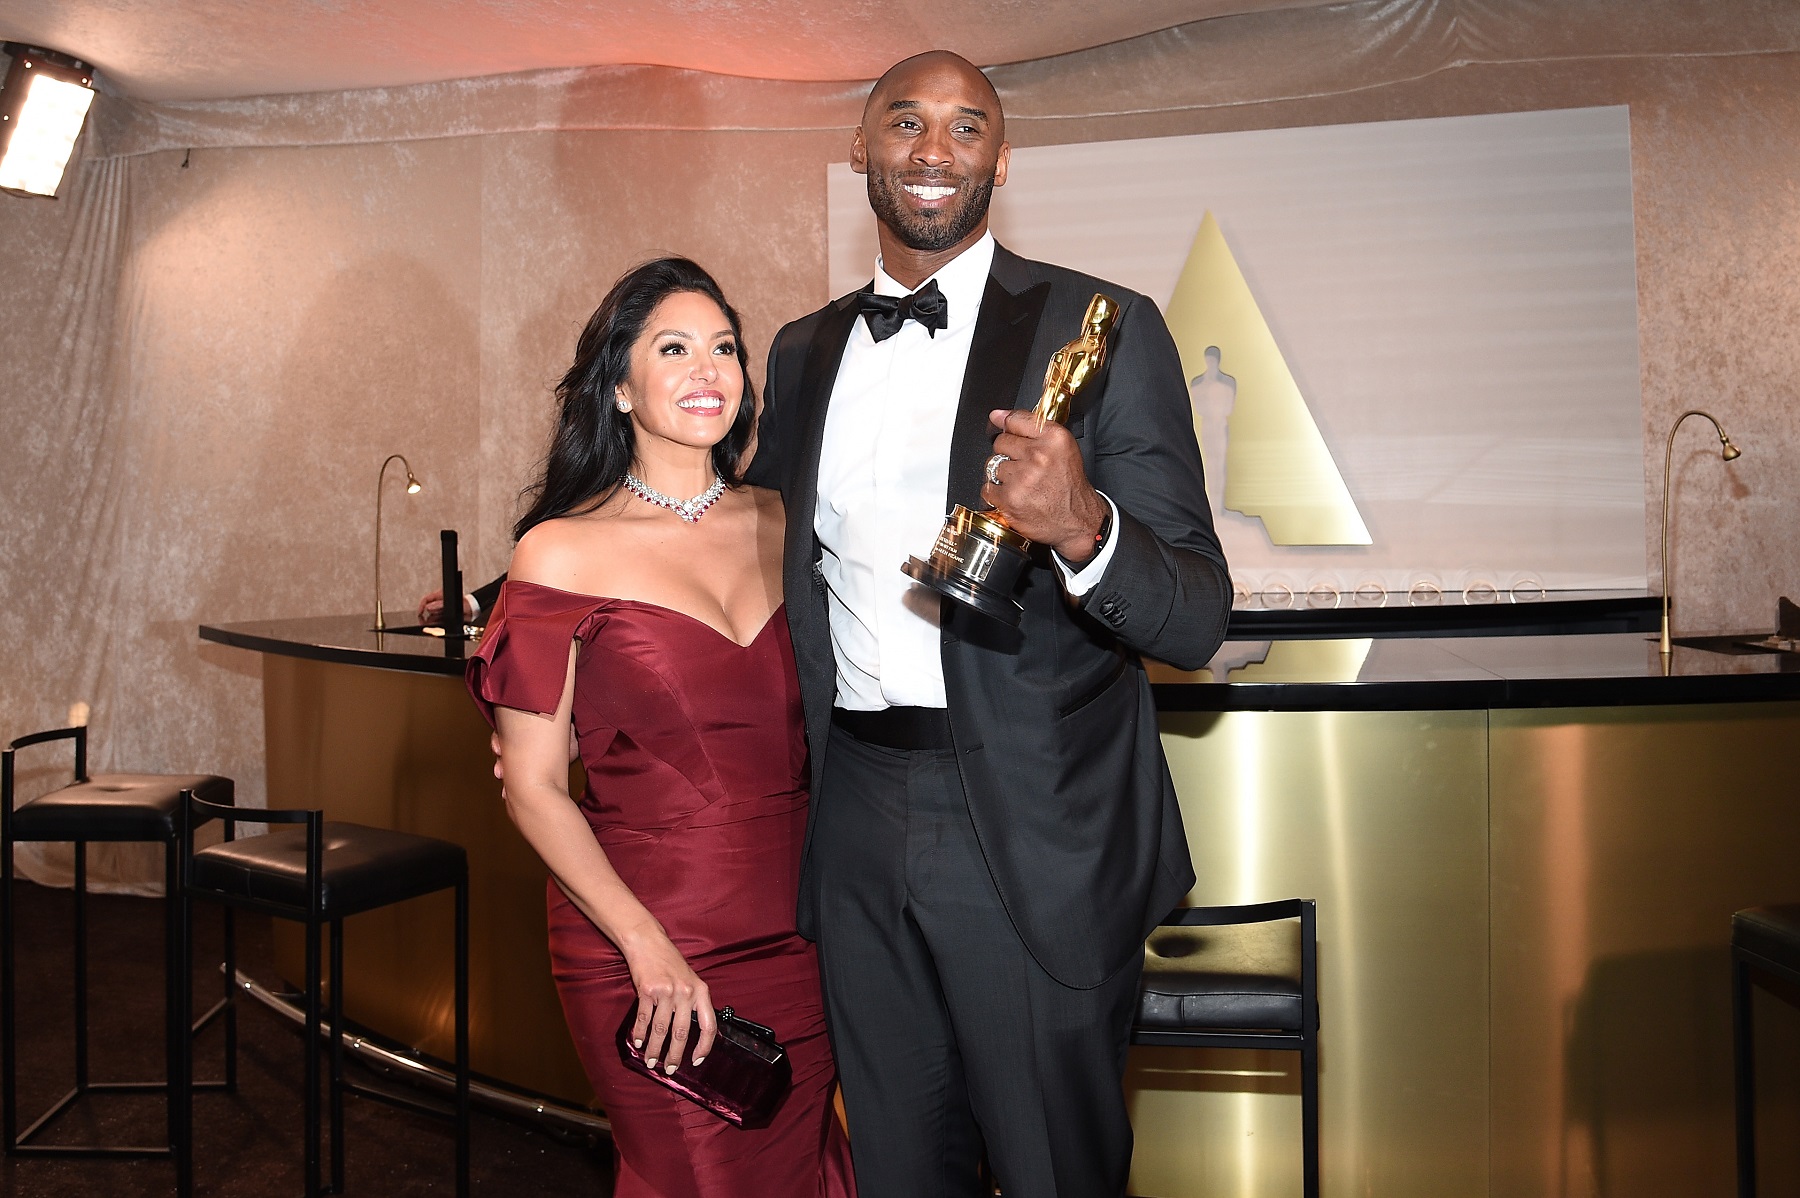 HOLLYWOOD, CA - MARCH 04:  Kobe Bryant (R) and Vanessa Laine Bryant attend the 90th Annual Academy Awards Governors Ball at Hollywood & Highland Center on March 4, 2018 in Hollywood, California.  (Photo by Kevork Djansezian/Getty Images)